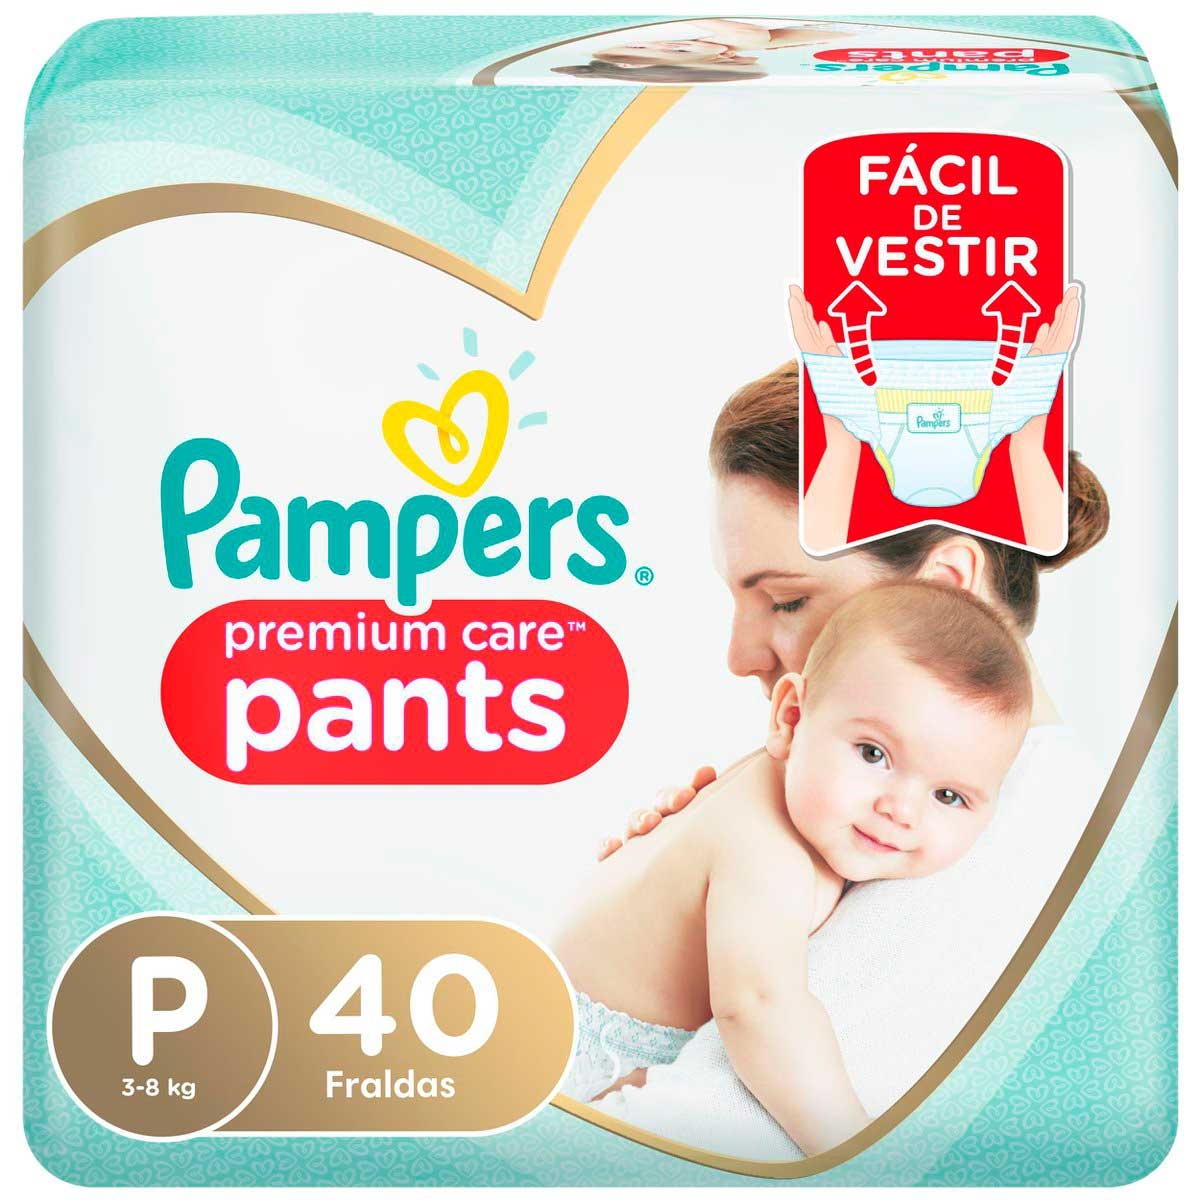 Pampers Premium Care Pants, Large size baby diapers (LG), 44 Count, Softest  ever | eBay